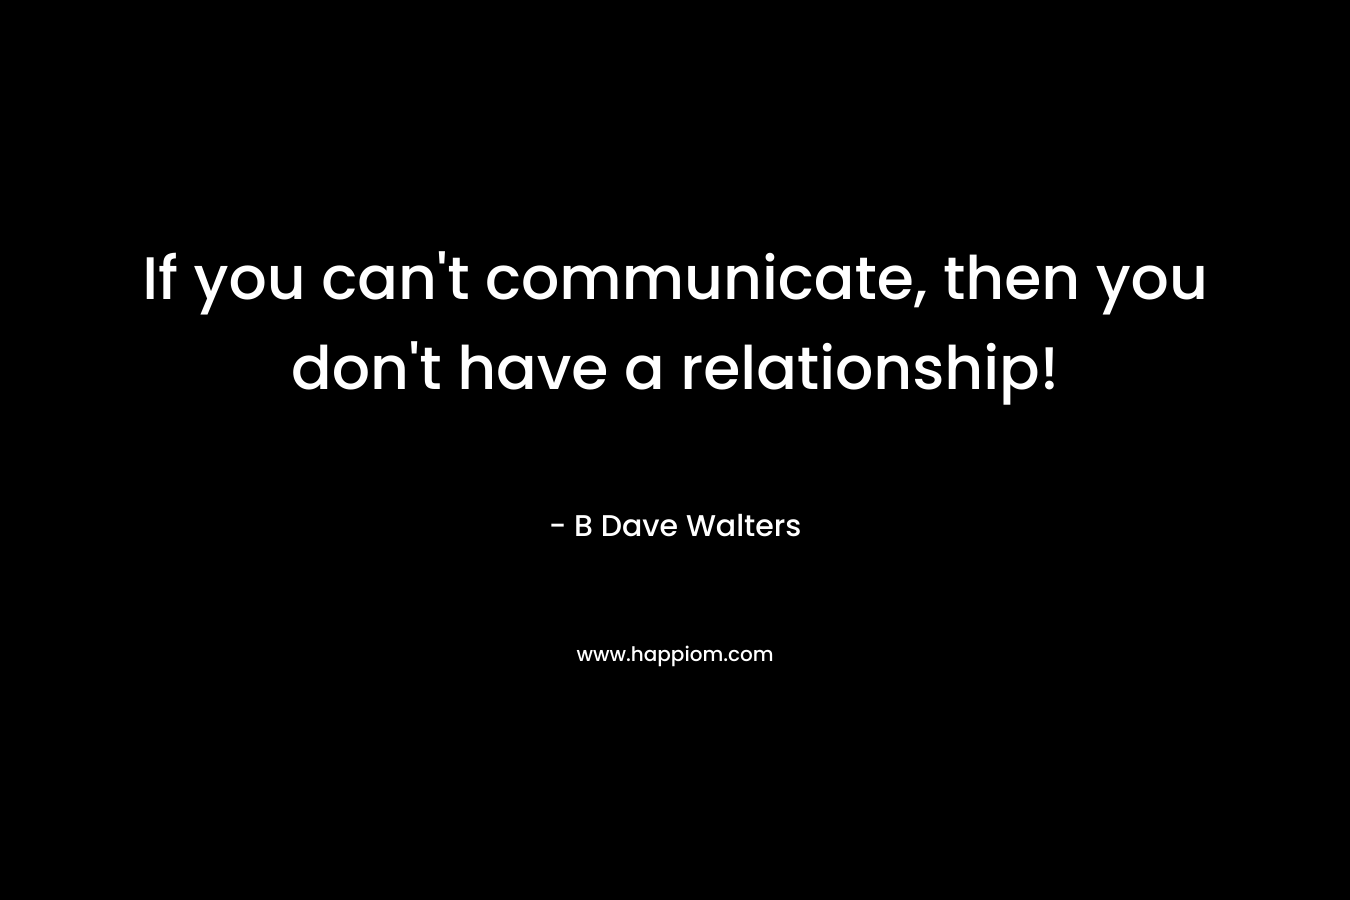 If you can't communicate, then you don't have a relationship!